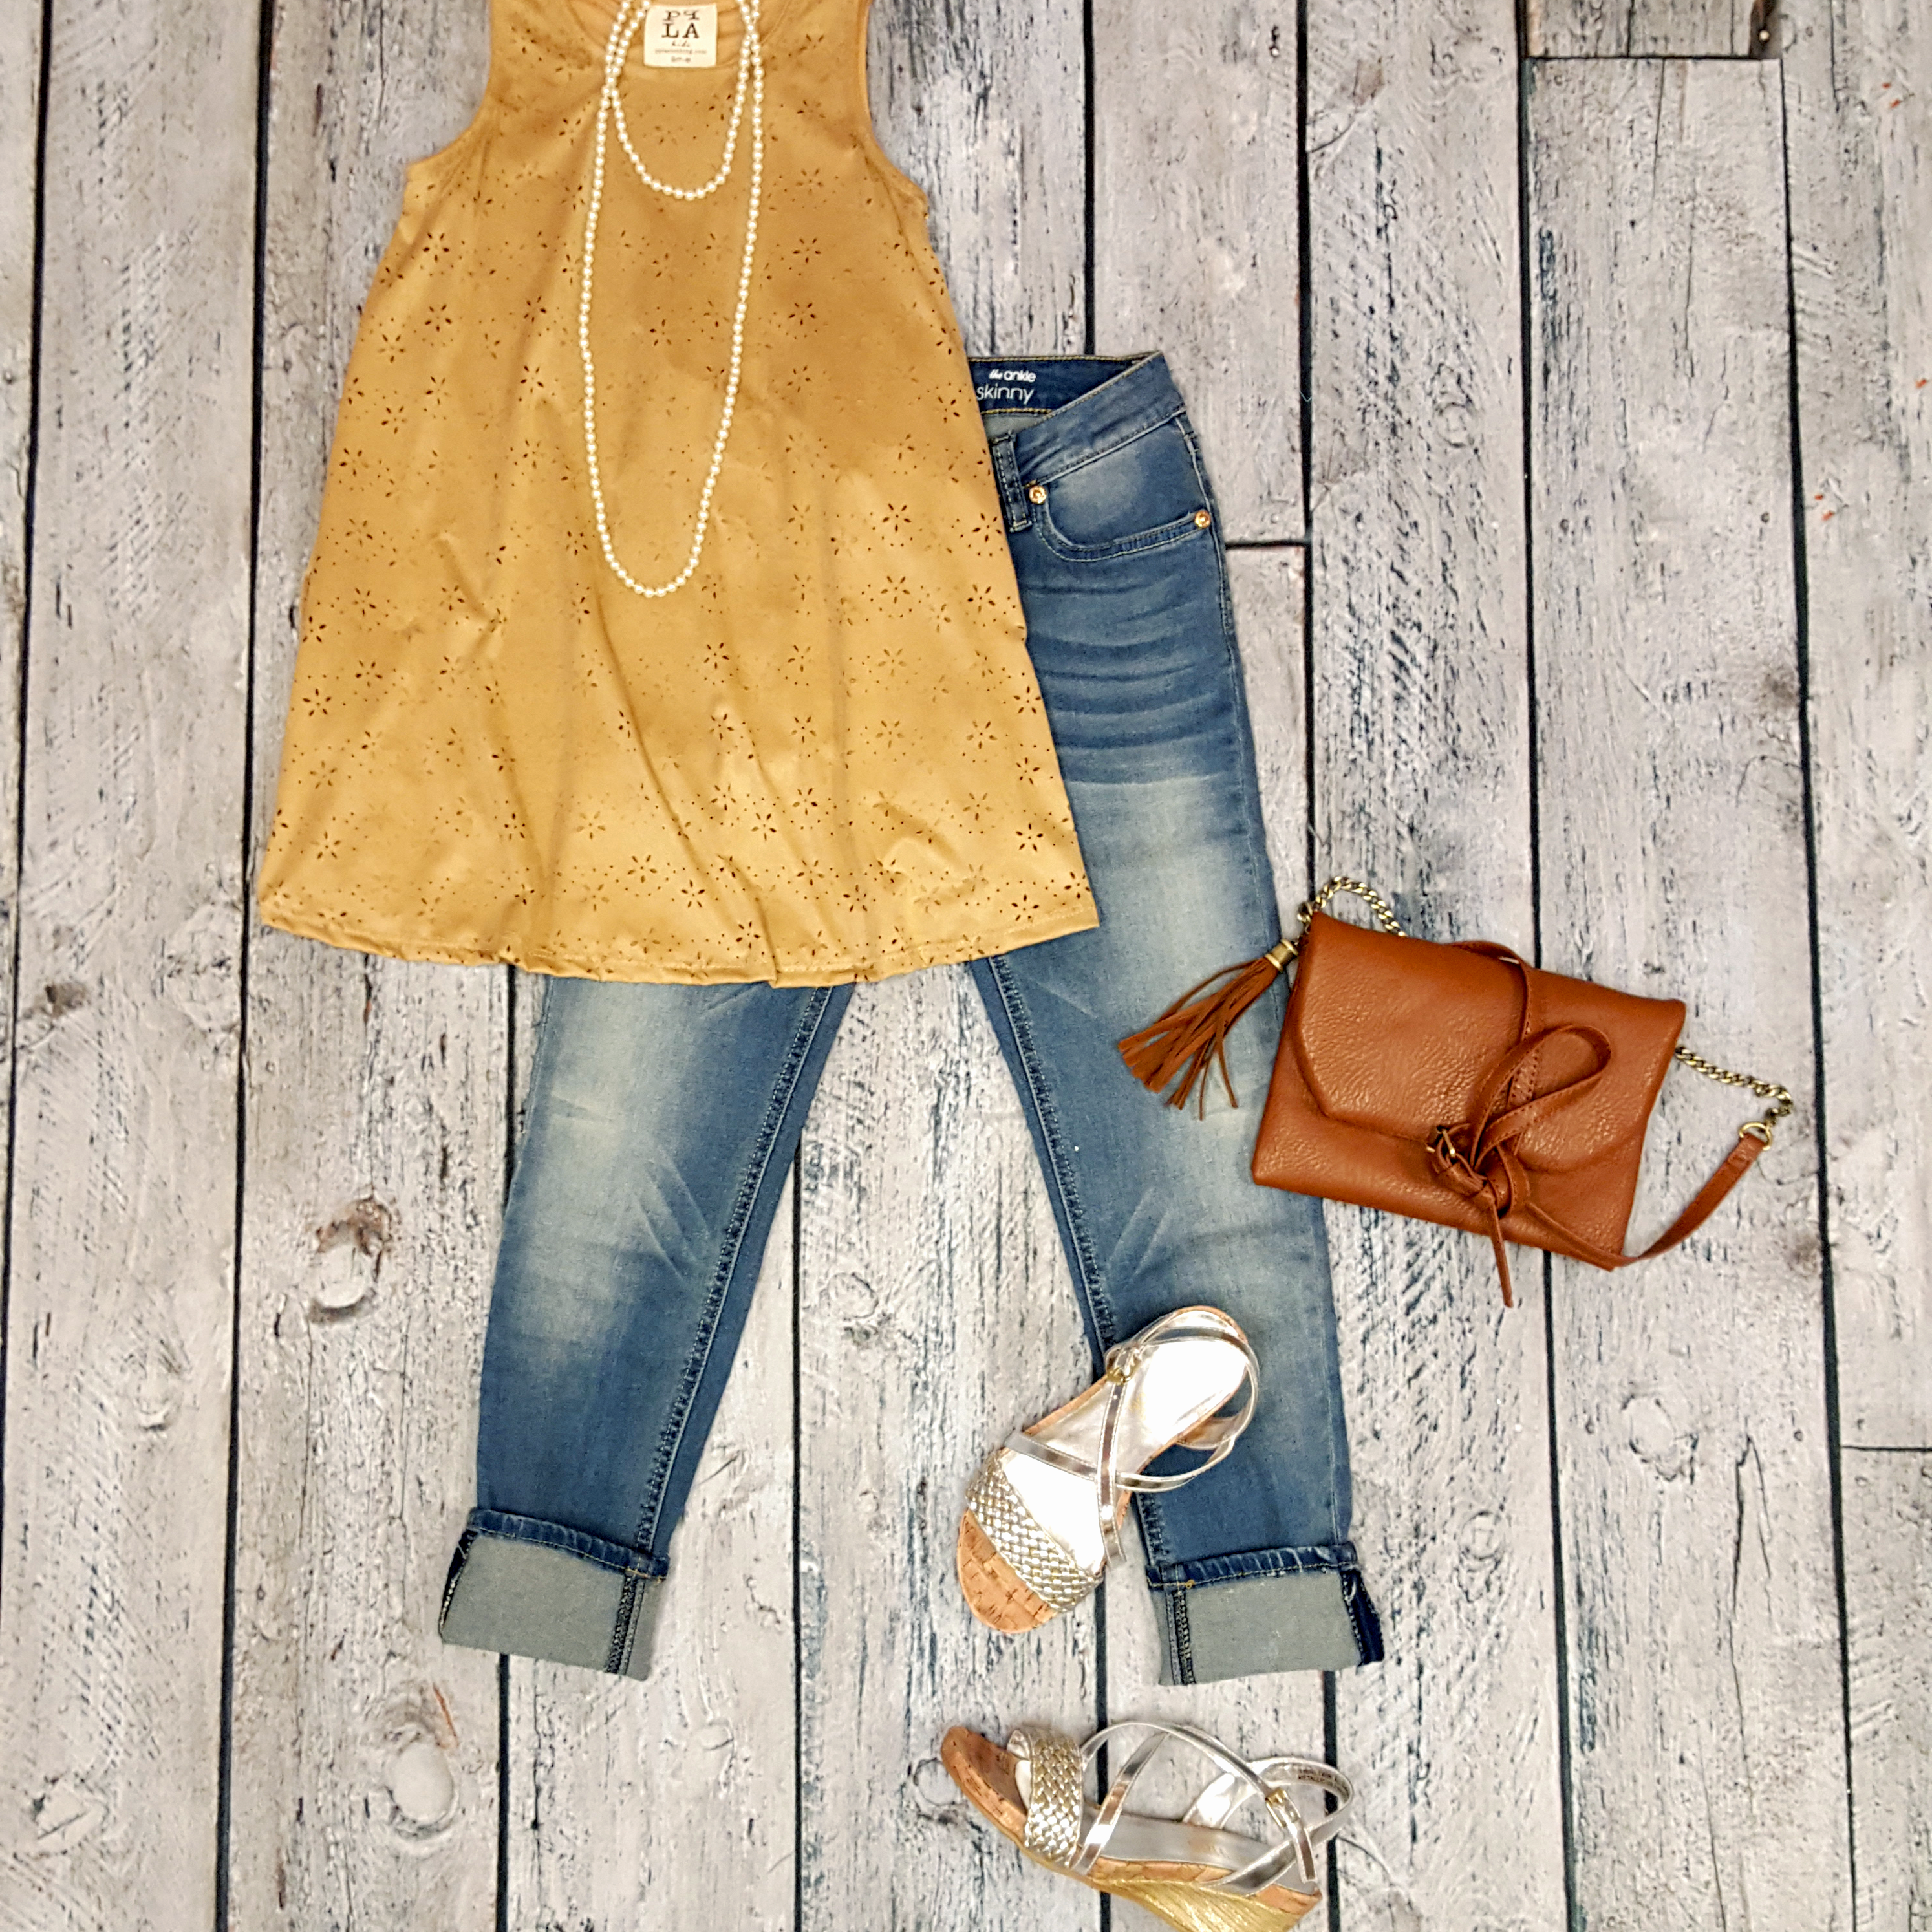 PPLA lasercut seude tunic, 7forAllMankind cropped jeans,Kenneth Cole wedges,tassel purse, and extra-long pearl necklace